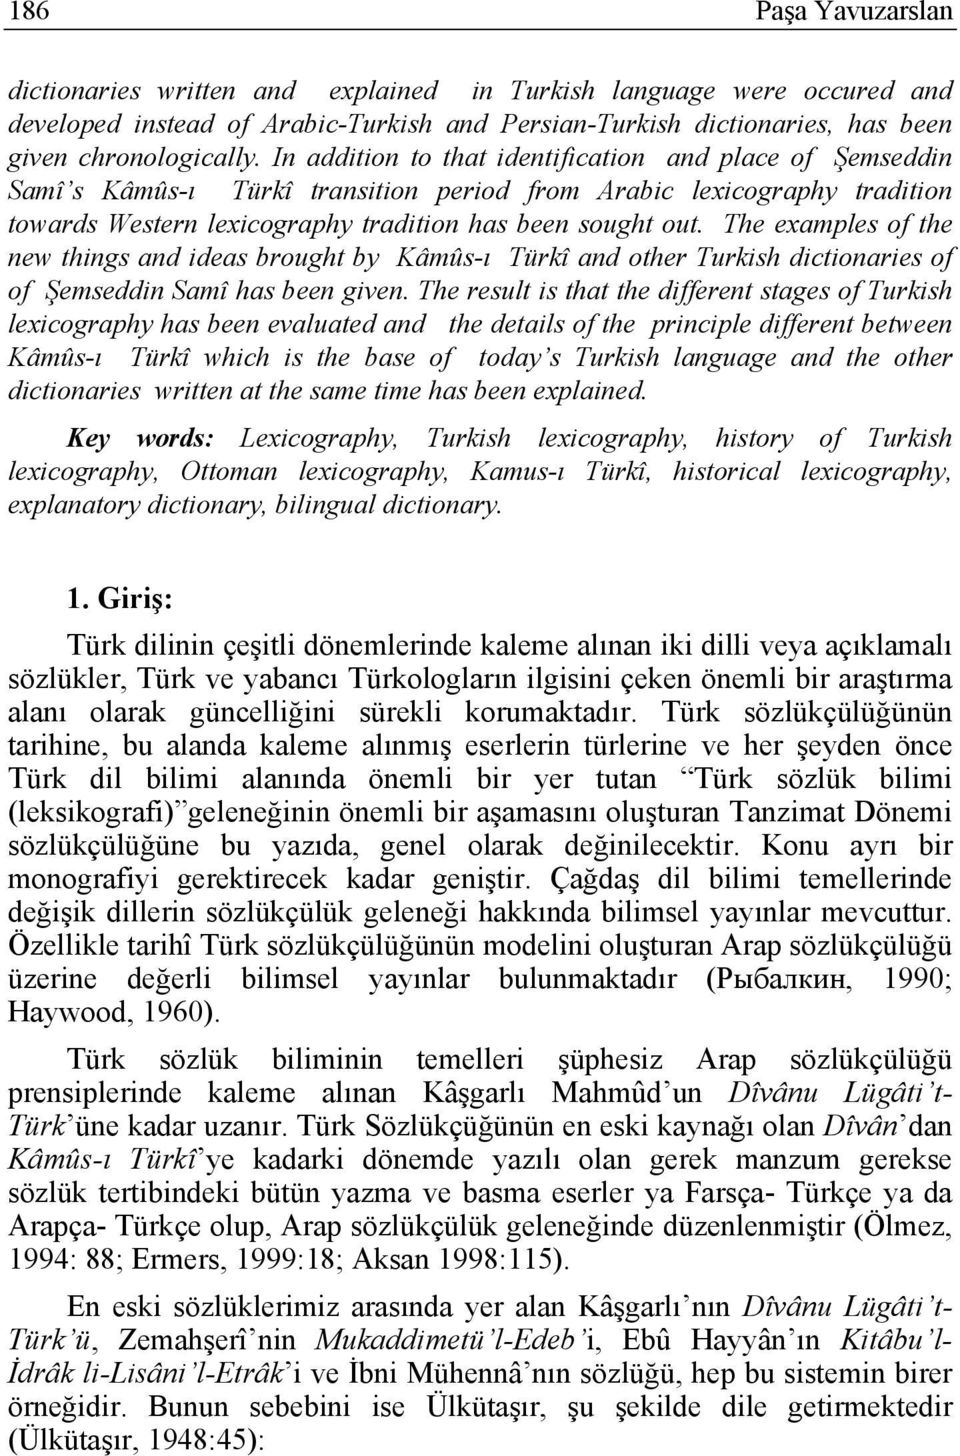 The examples of the new things and ideas brought by Kâmûs-ı Türkî and other Turkish dictionaries of of Şemseddin Samî has been given.